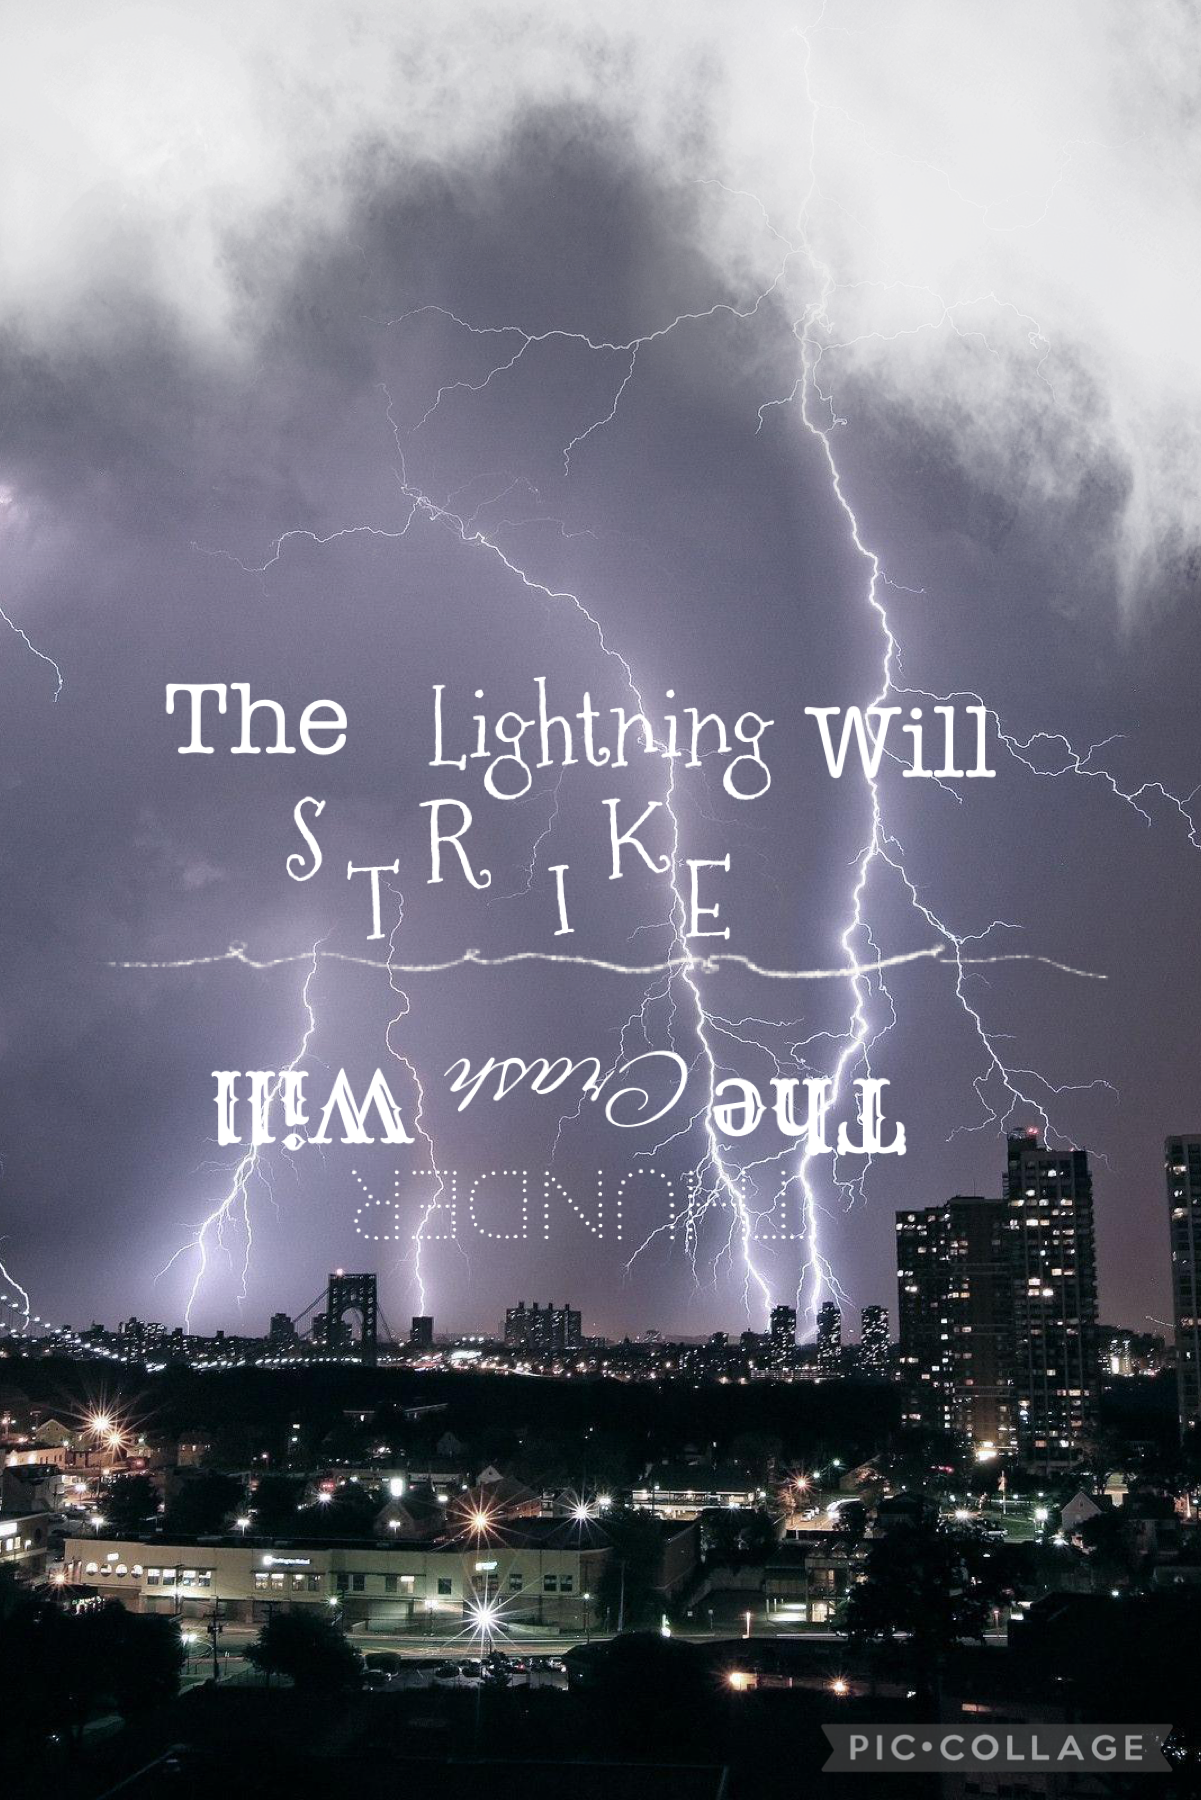 In case you can’t read it very well it says “The lightning will strike. The thunder will crash”